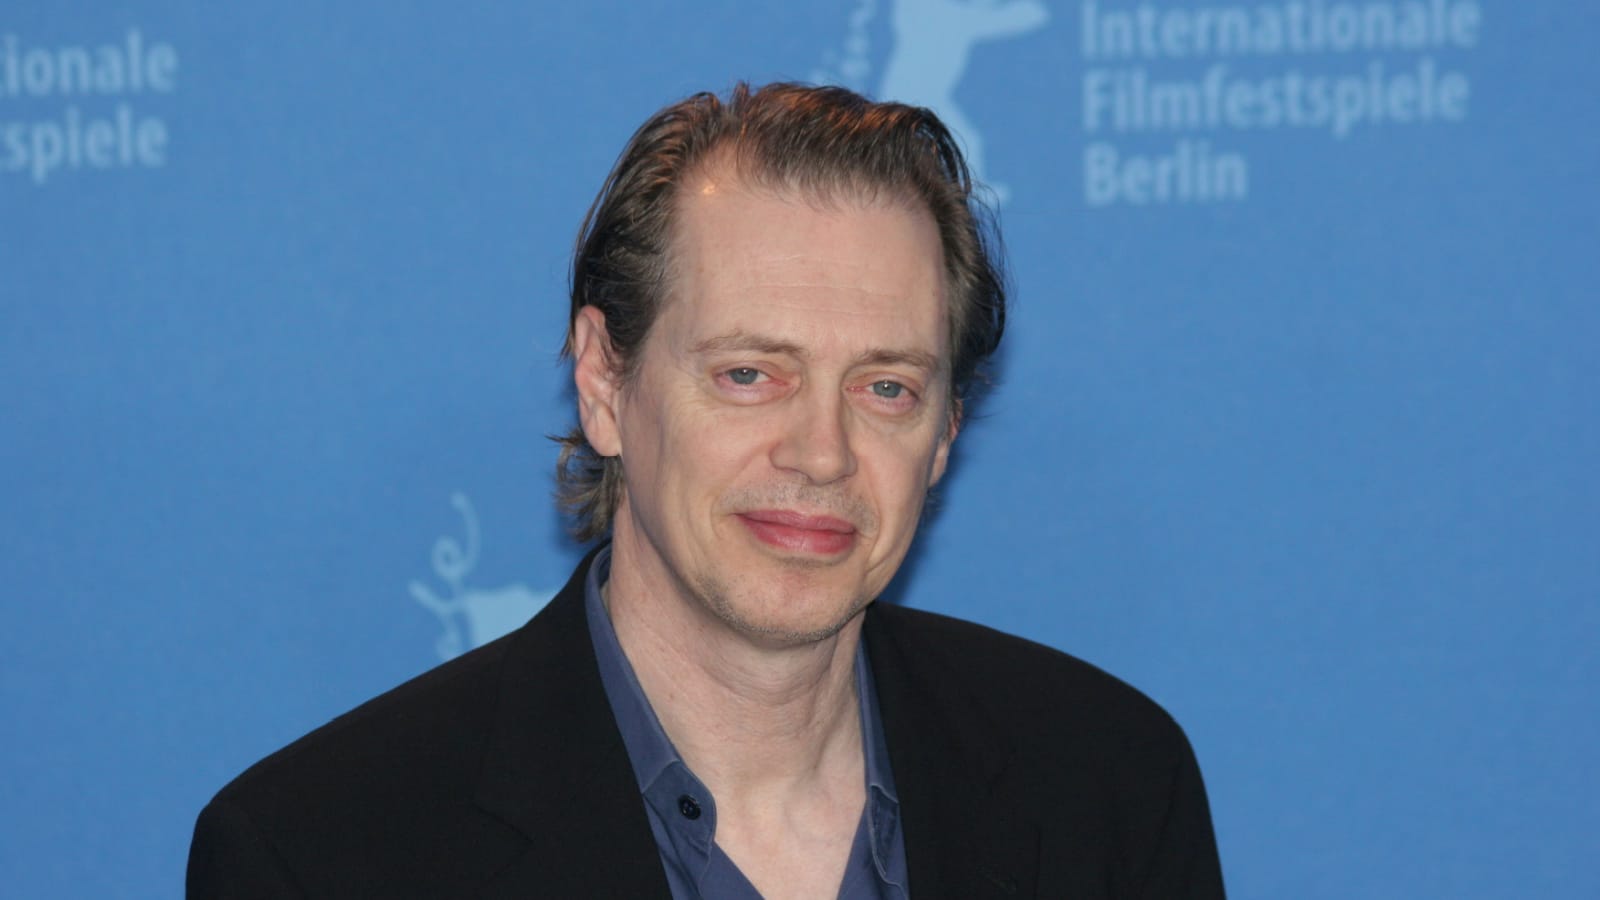 BERLIN - FEBRUARY 14: Actor Steve Buscemi attends the photo call to promote the movie 'Interview' during the 57th Berlin International Film Festival (Berlinale) on February 14, 2007 in Berlin, Germany